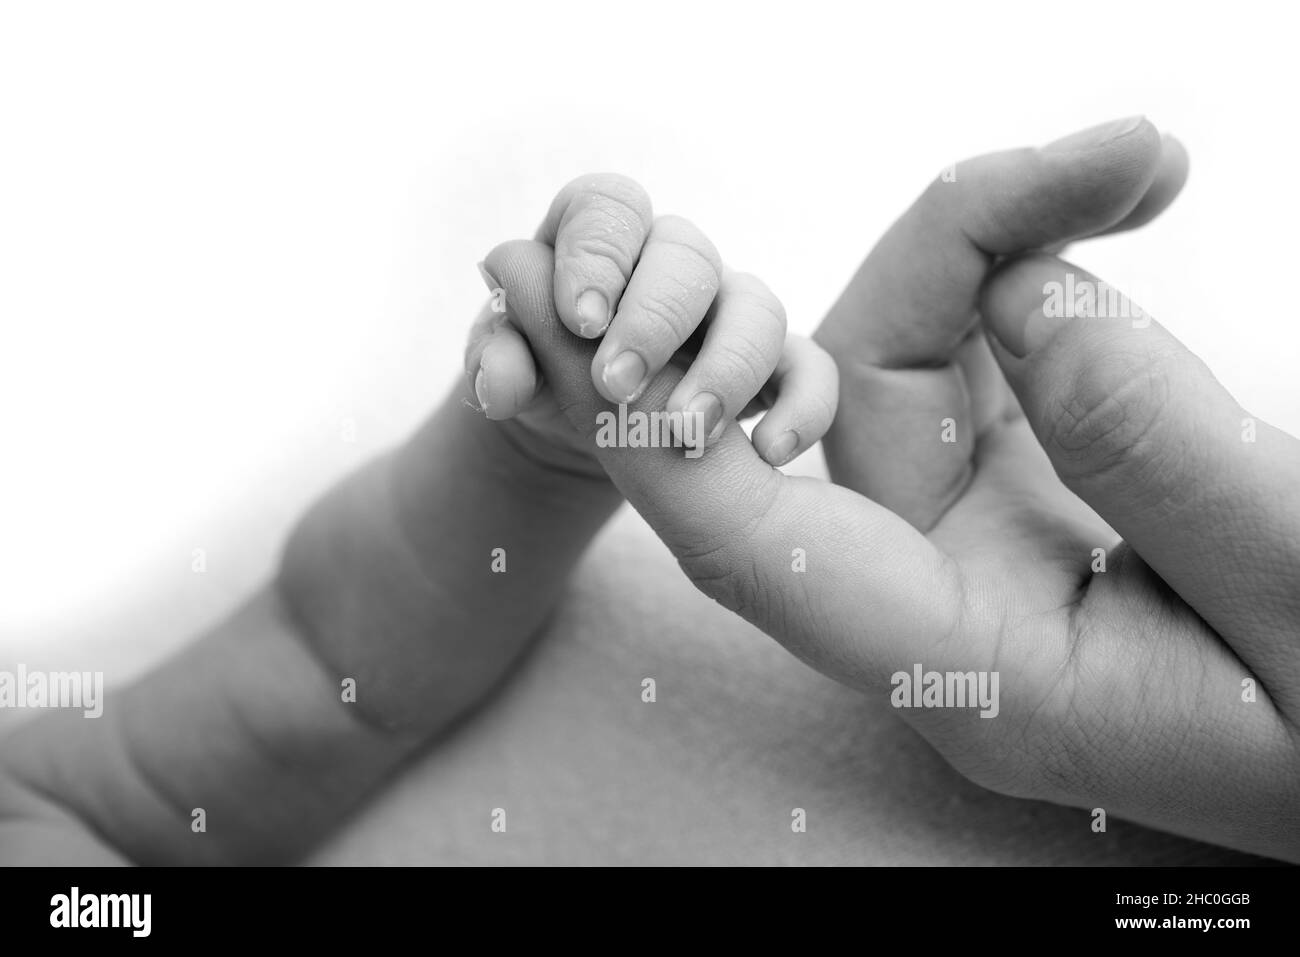 The newborn baby has a firm grip on the parent's finger after birth.  Stock Photo